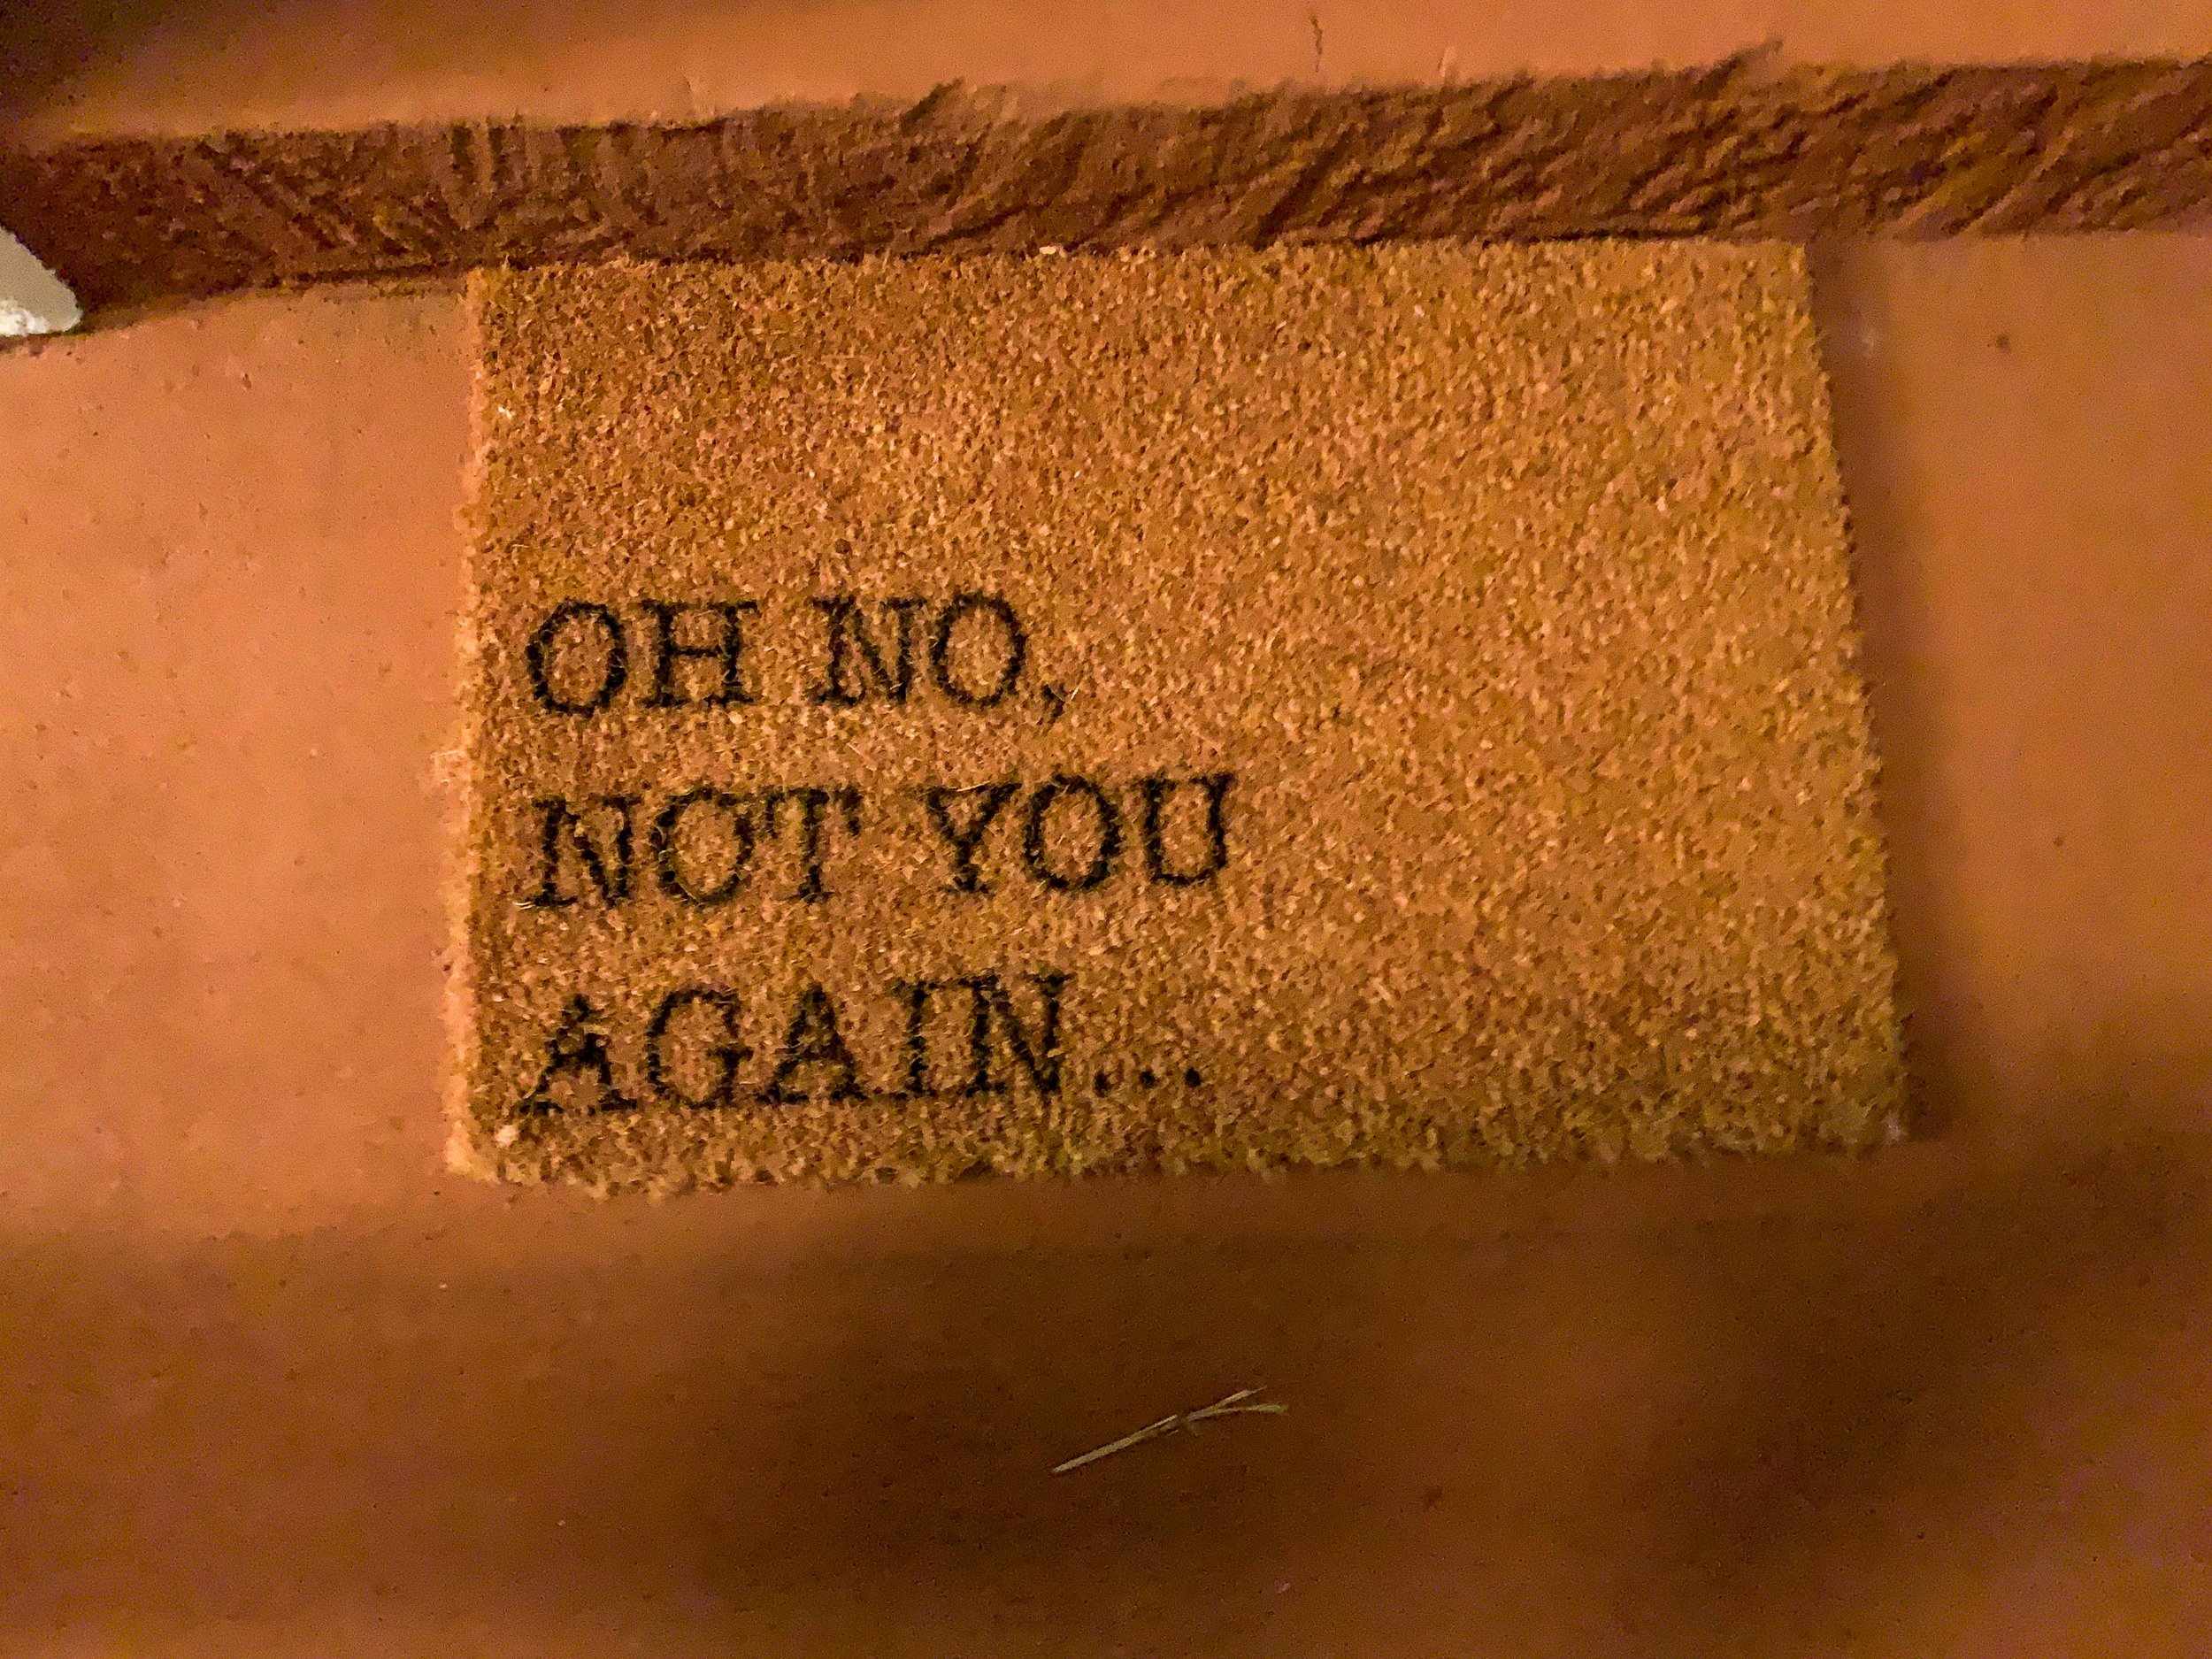 Greatest Doormat of All Time